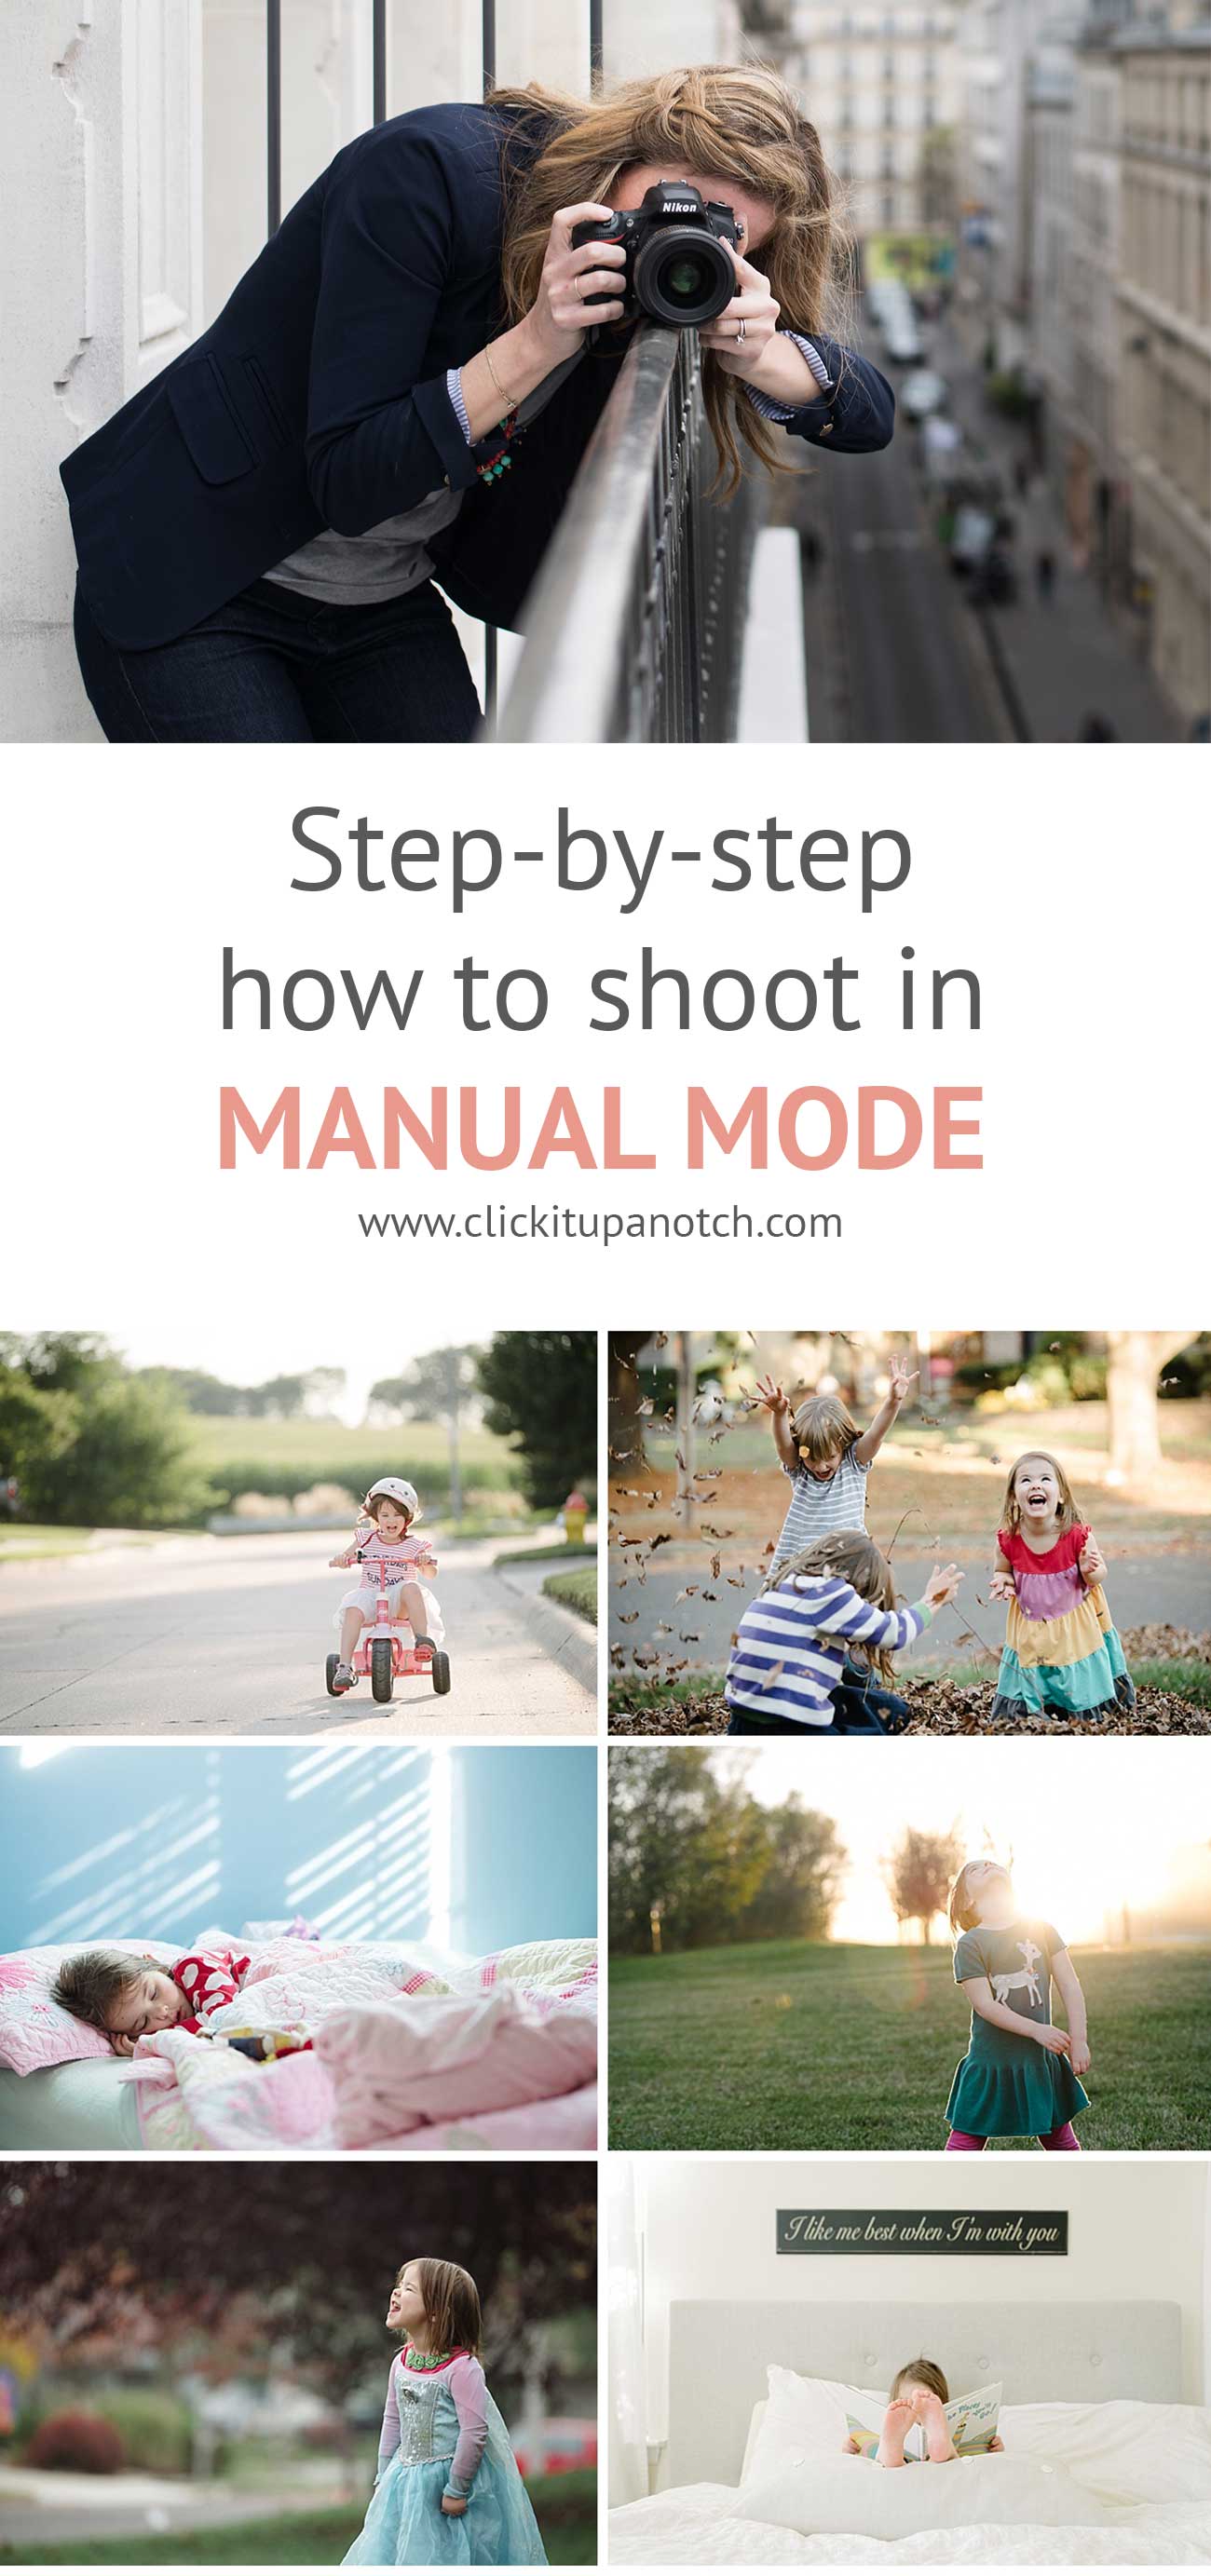 Stop feeling frustrated with your camera! This step-by-step tutorial teaches you everything you need to learn on how to shoot in manual mode.